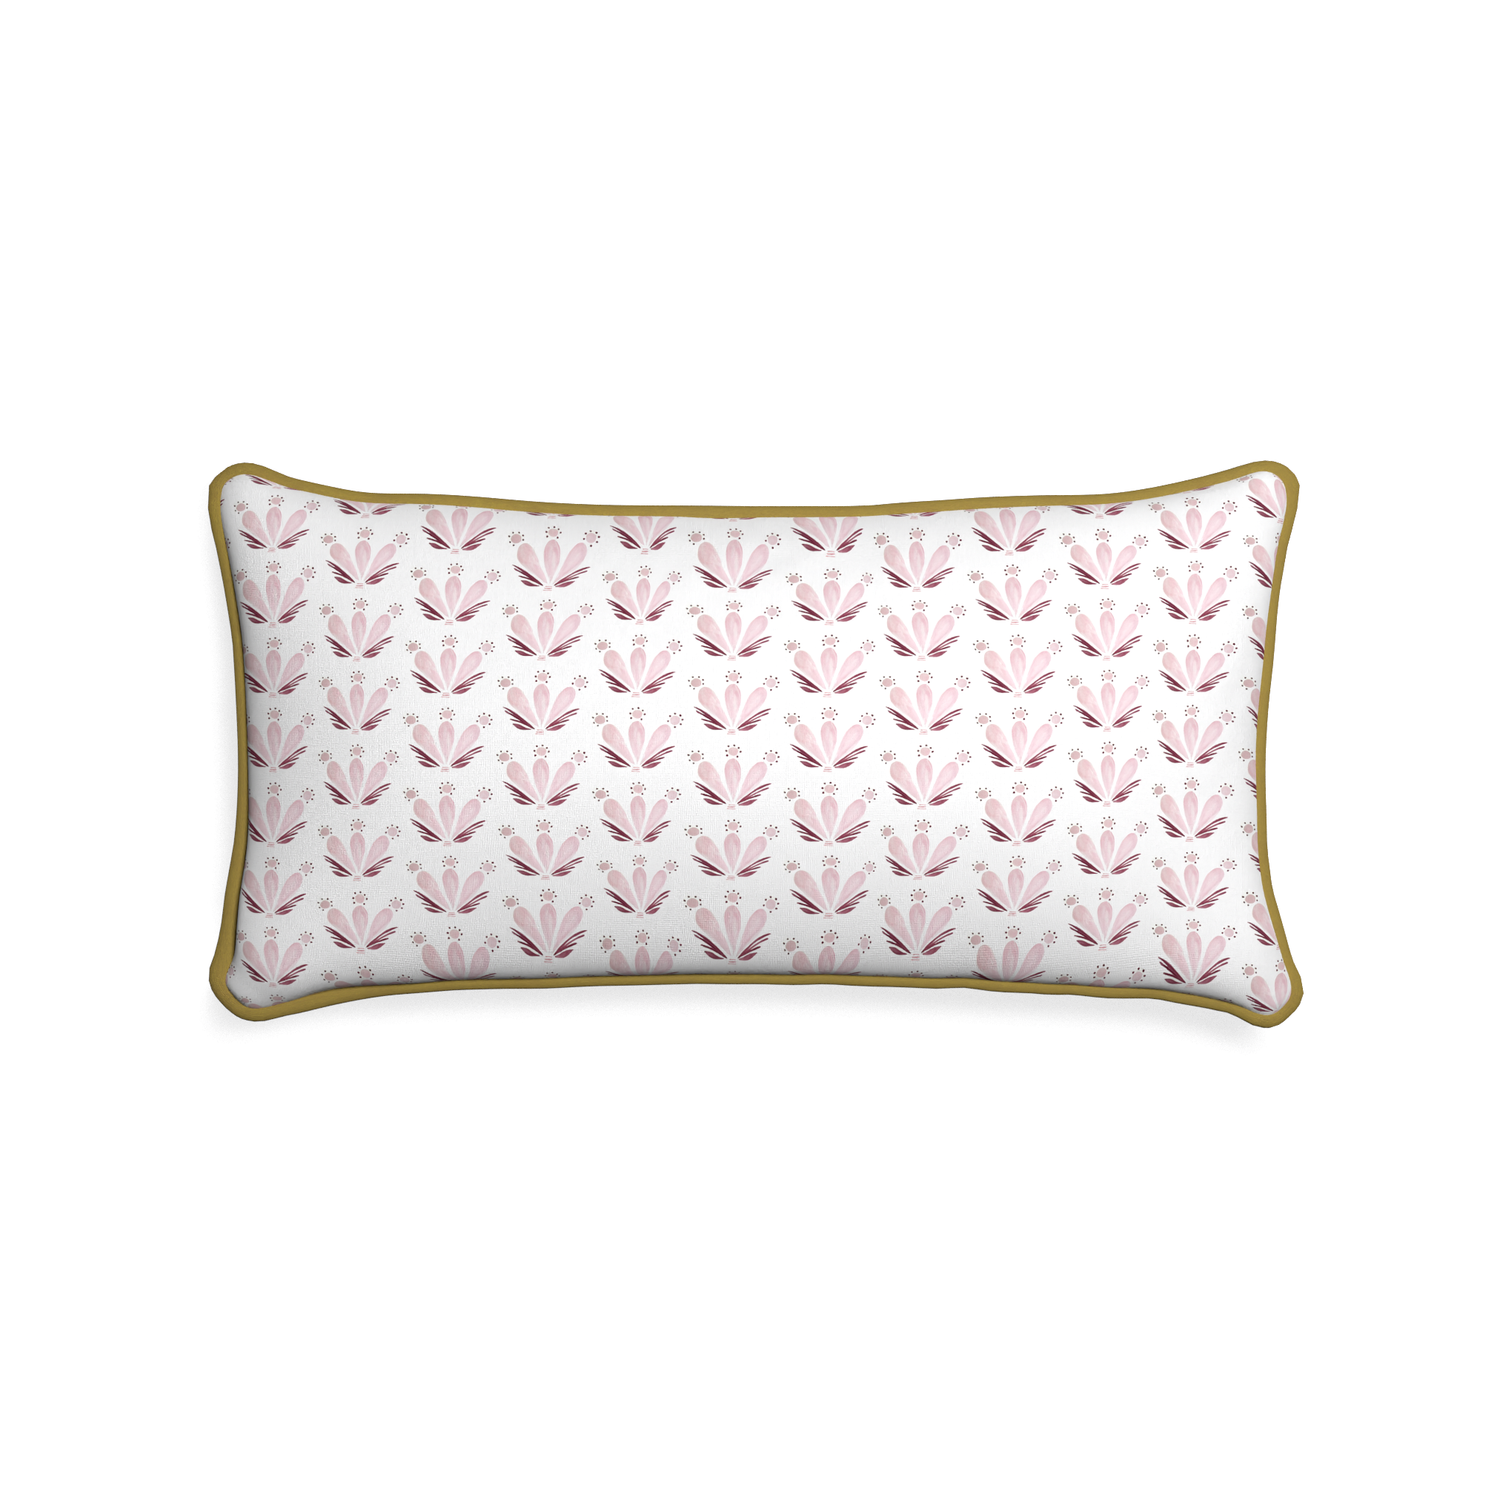 Midi-lumbar serena pink custom pink & burgundy drop repeat floralpillow with c piping on white background